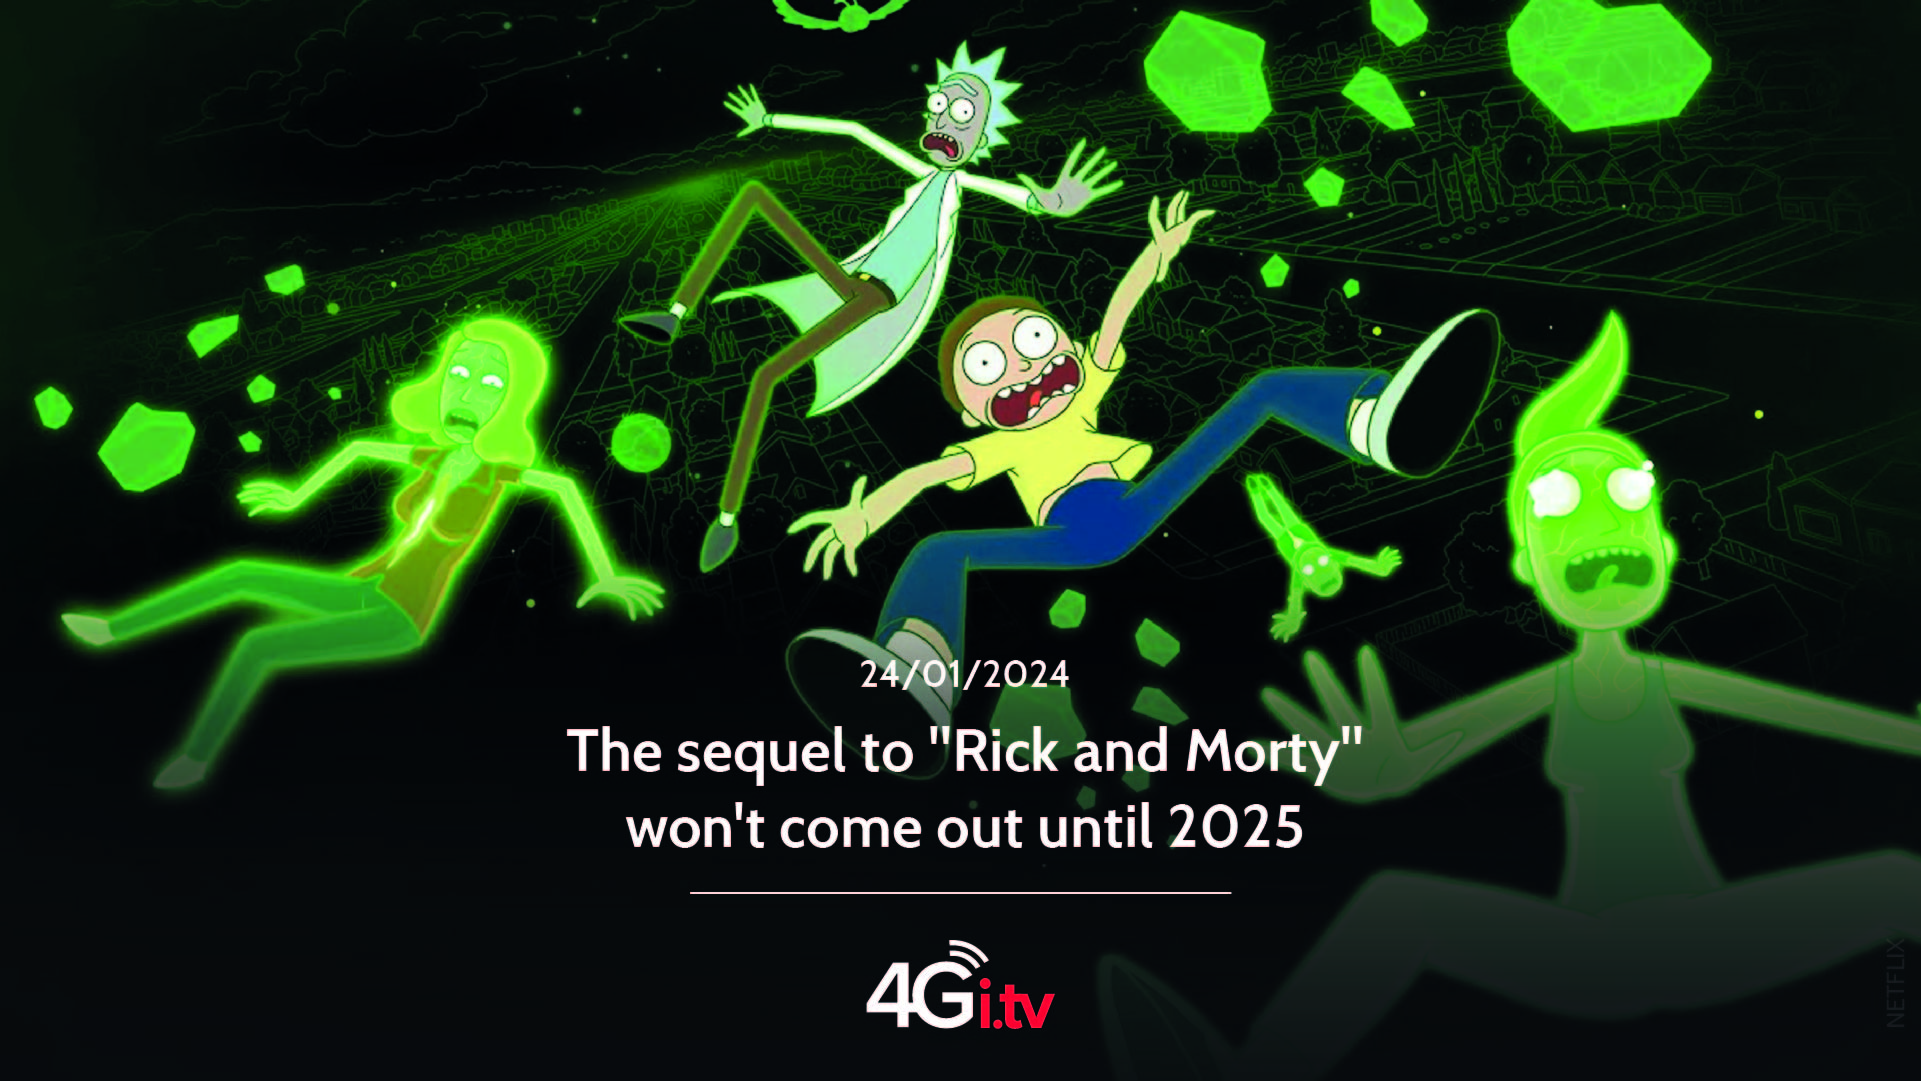 Подробнее о статье The sequel to “Rick and Morty” won’t come out until 2025 